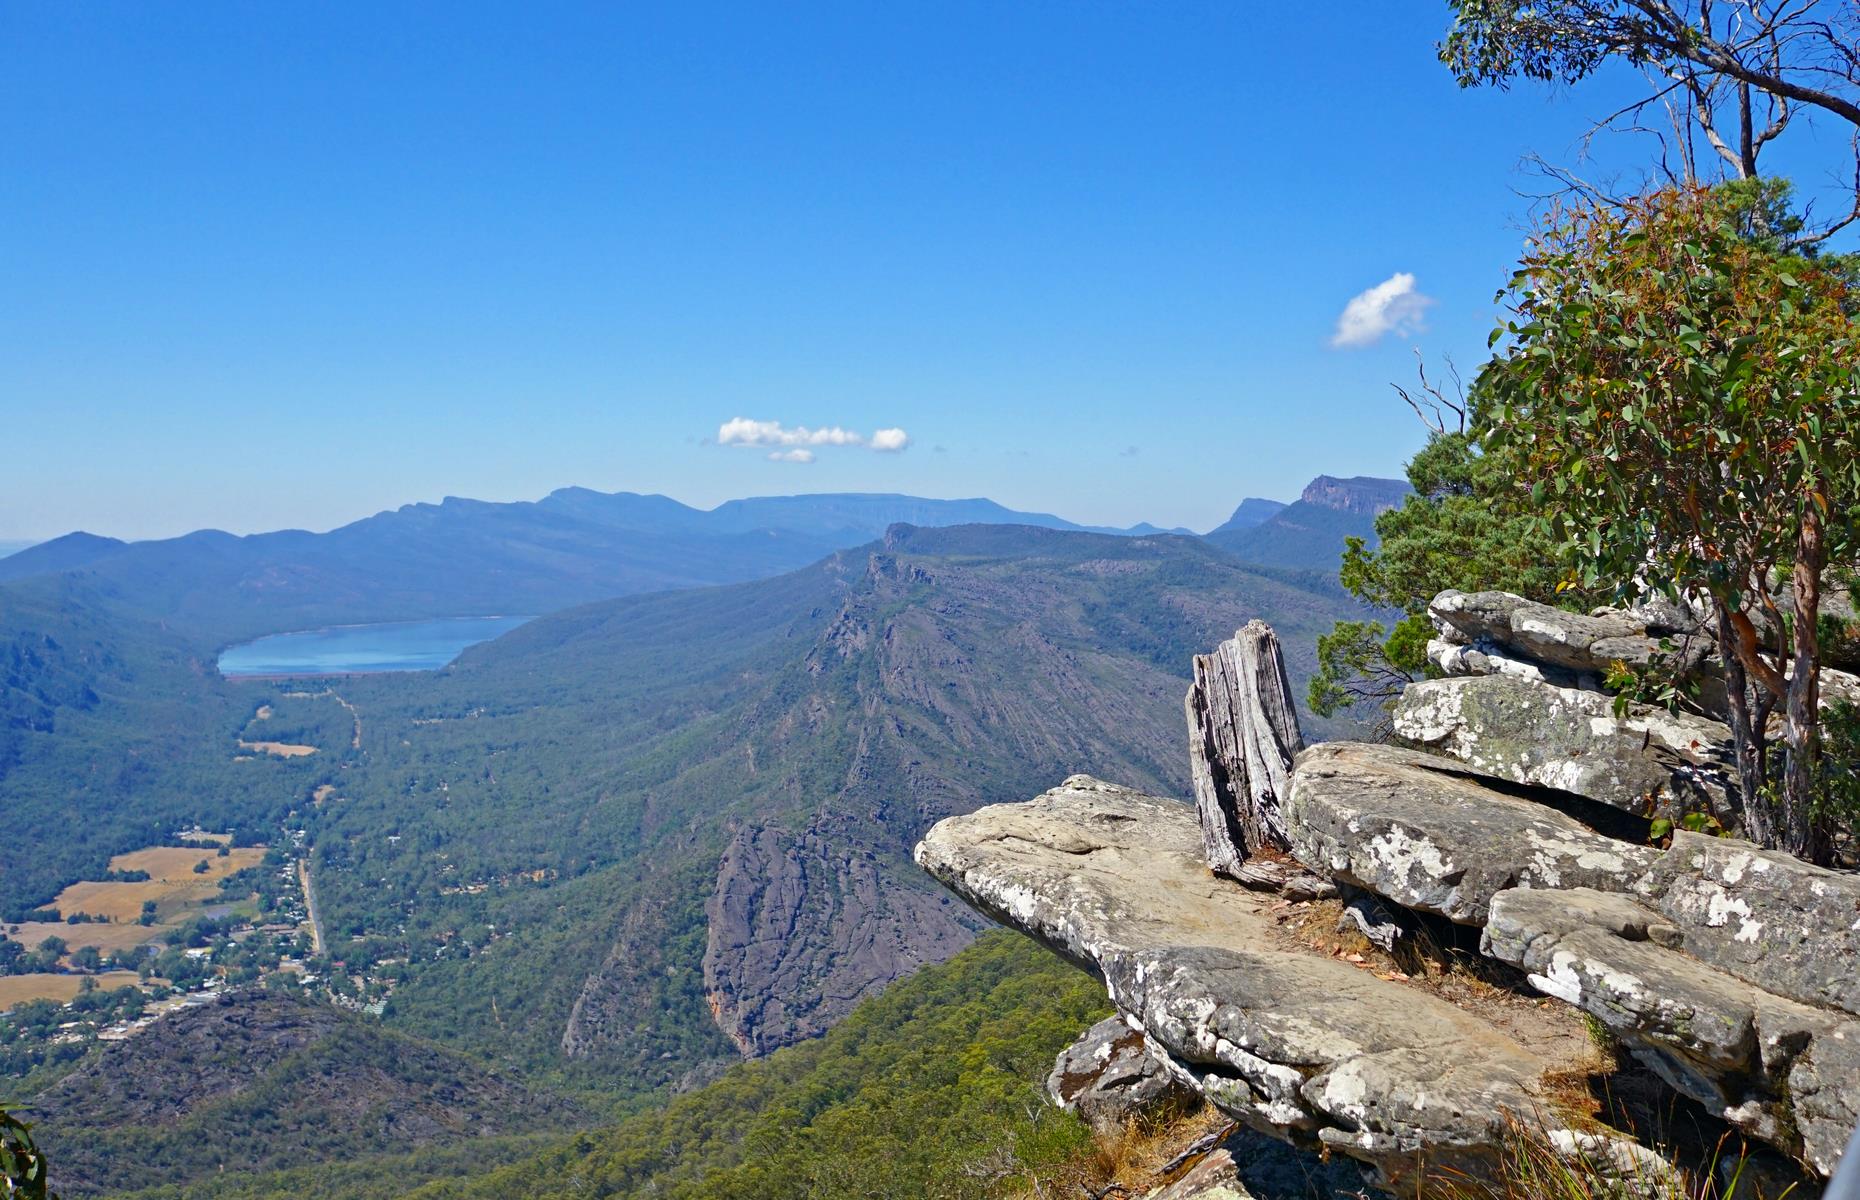 33 incredible national parks in Australia to explore